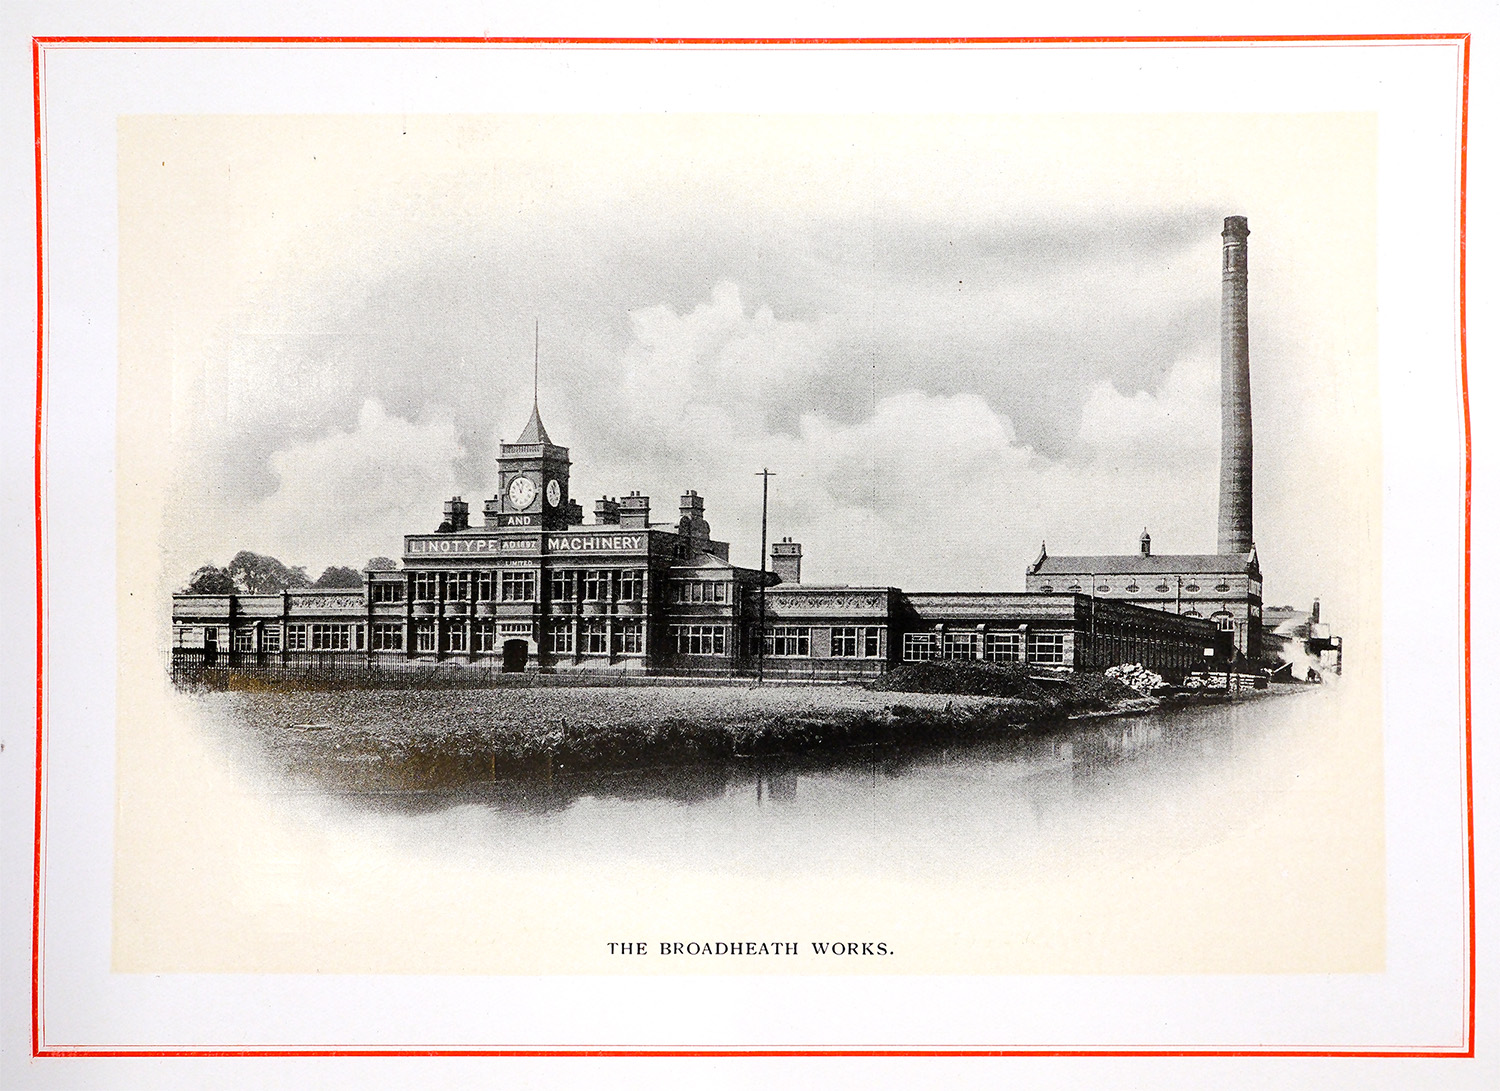 Another angle of the Broadheath Works and the Bridgewater Canal